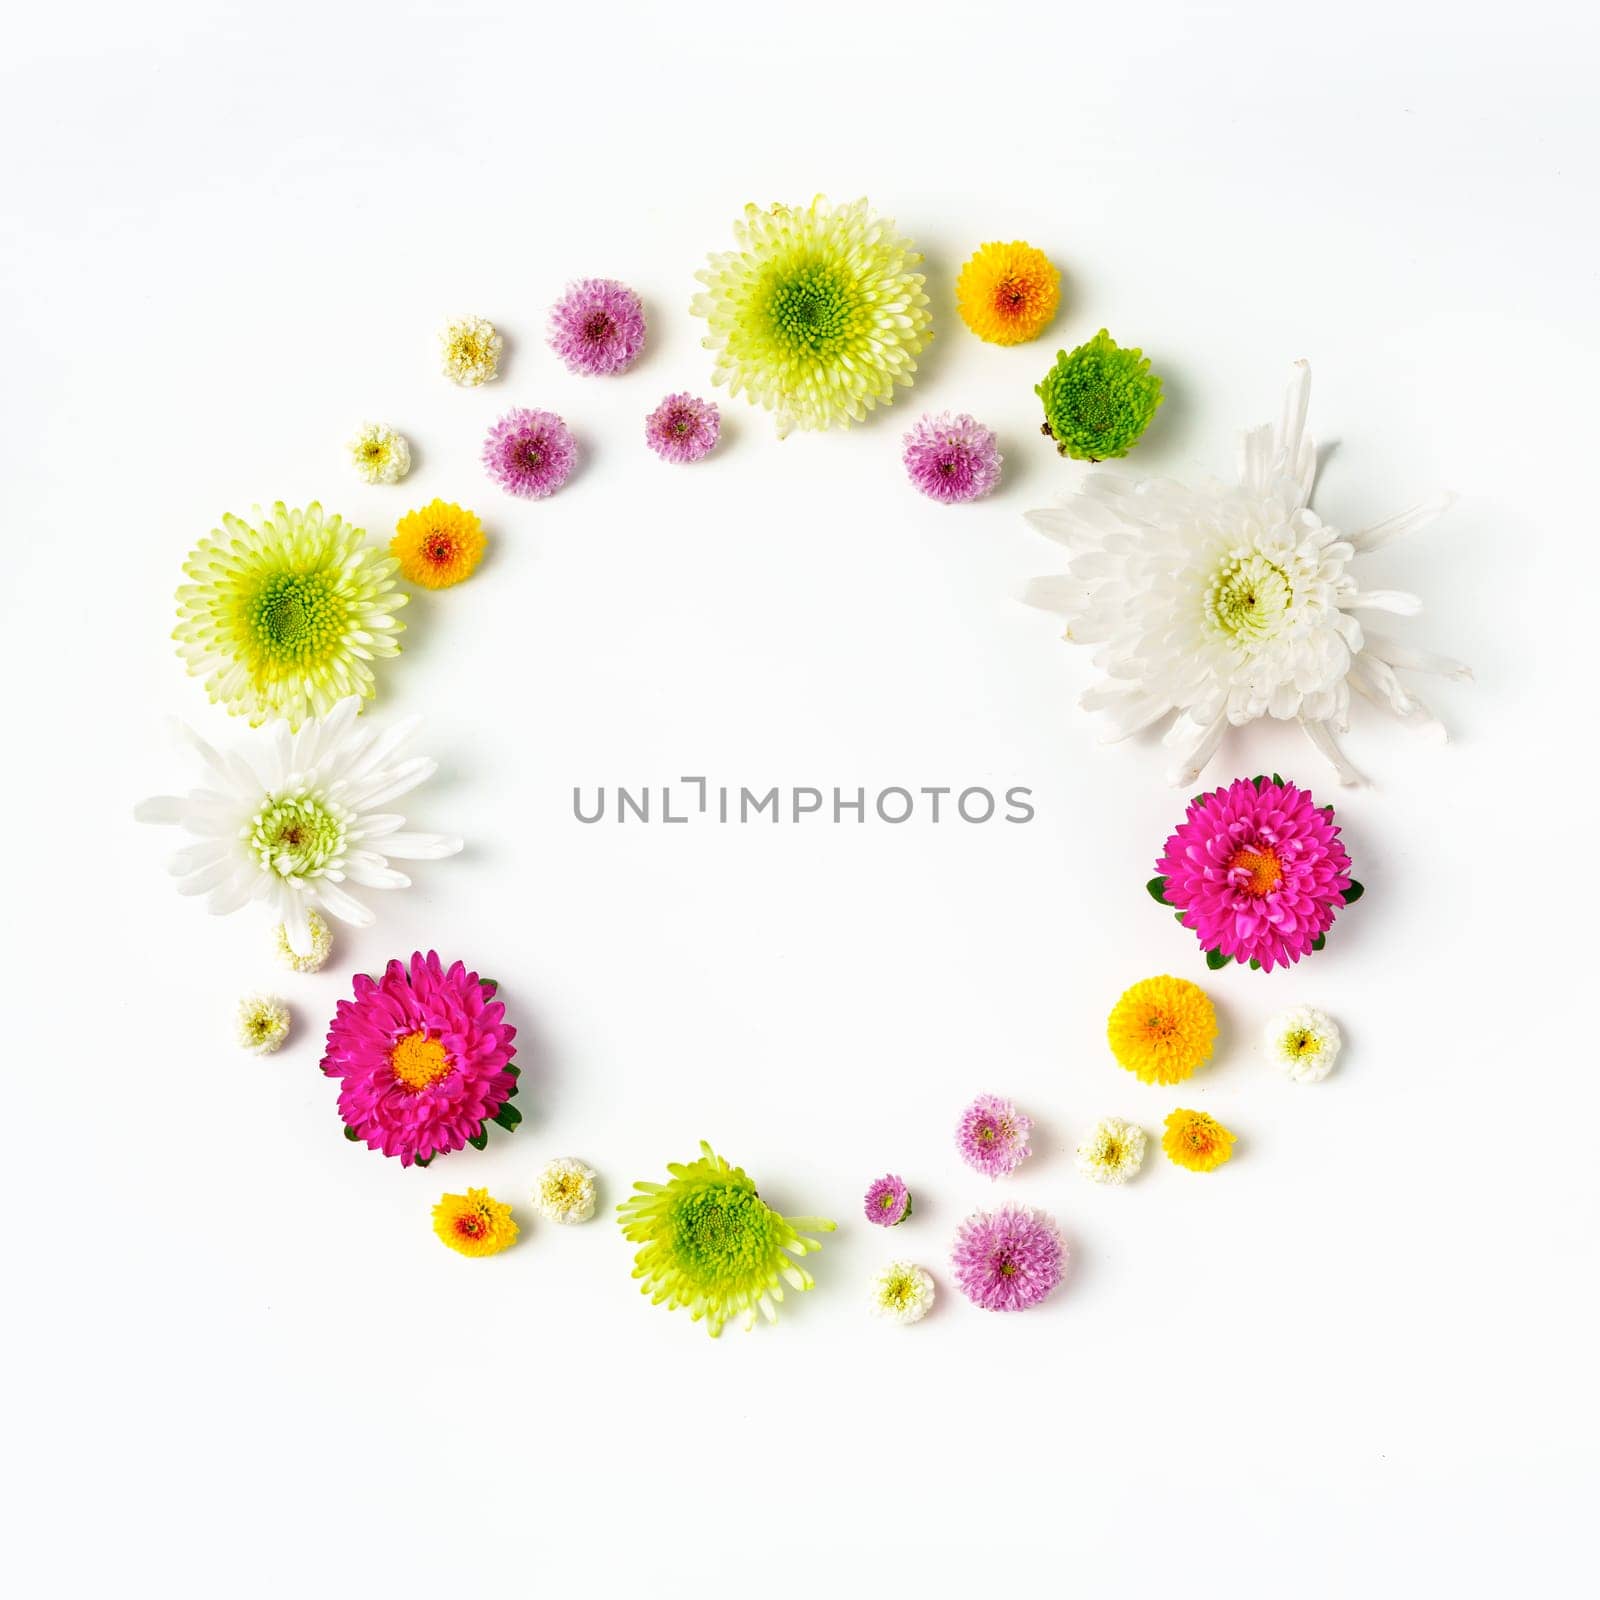 Small spring flowers arranged on white background by Fabrikasimf